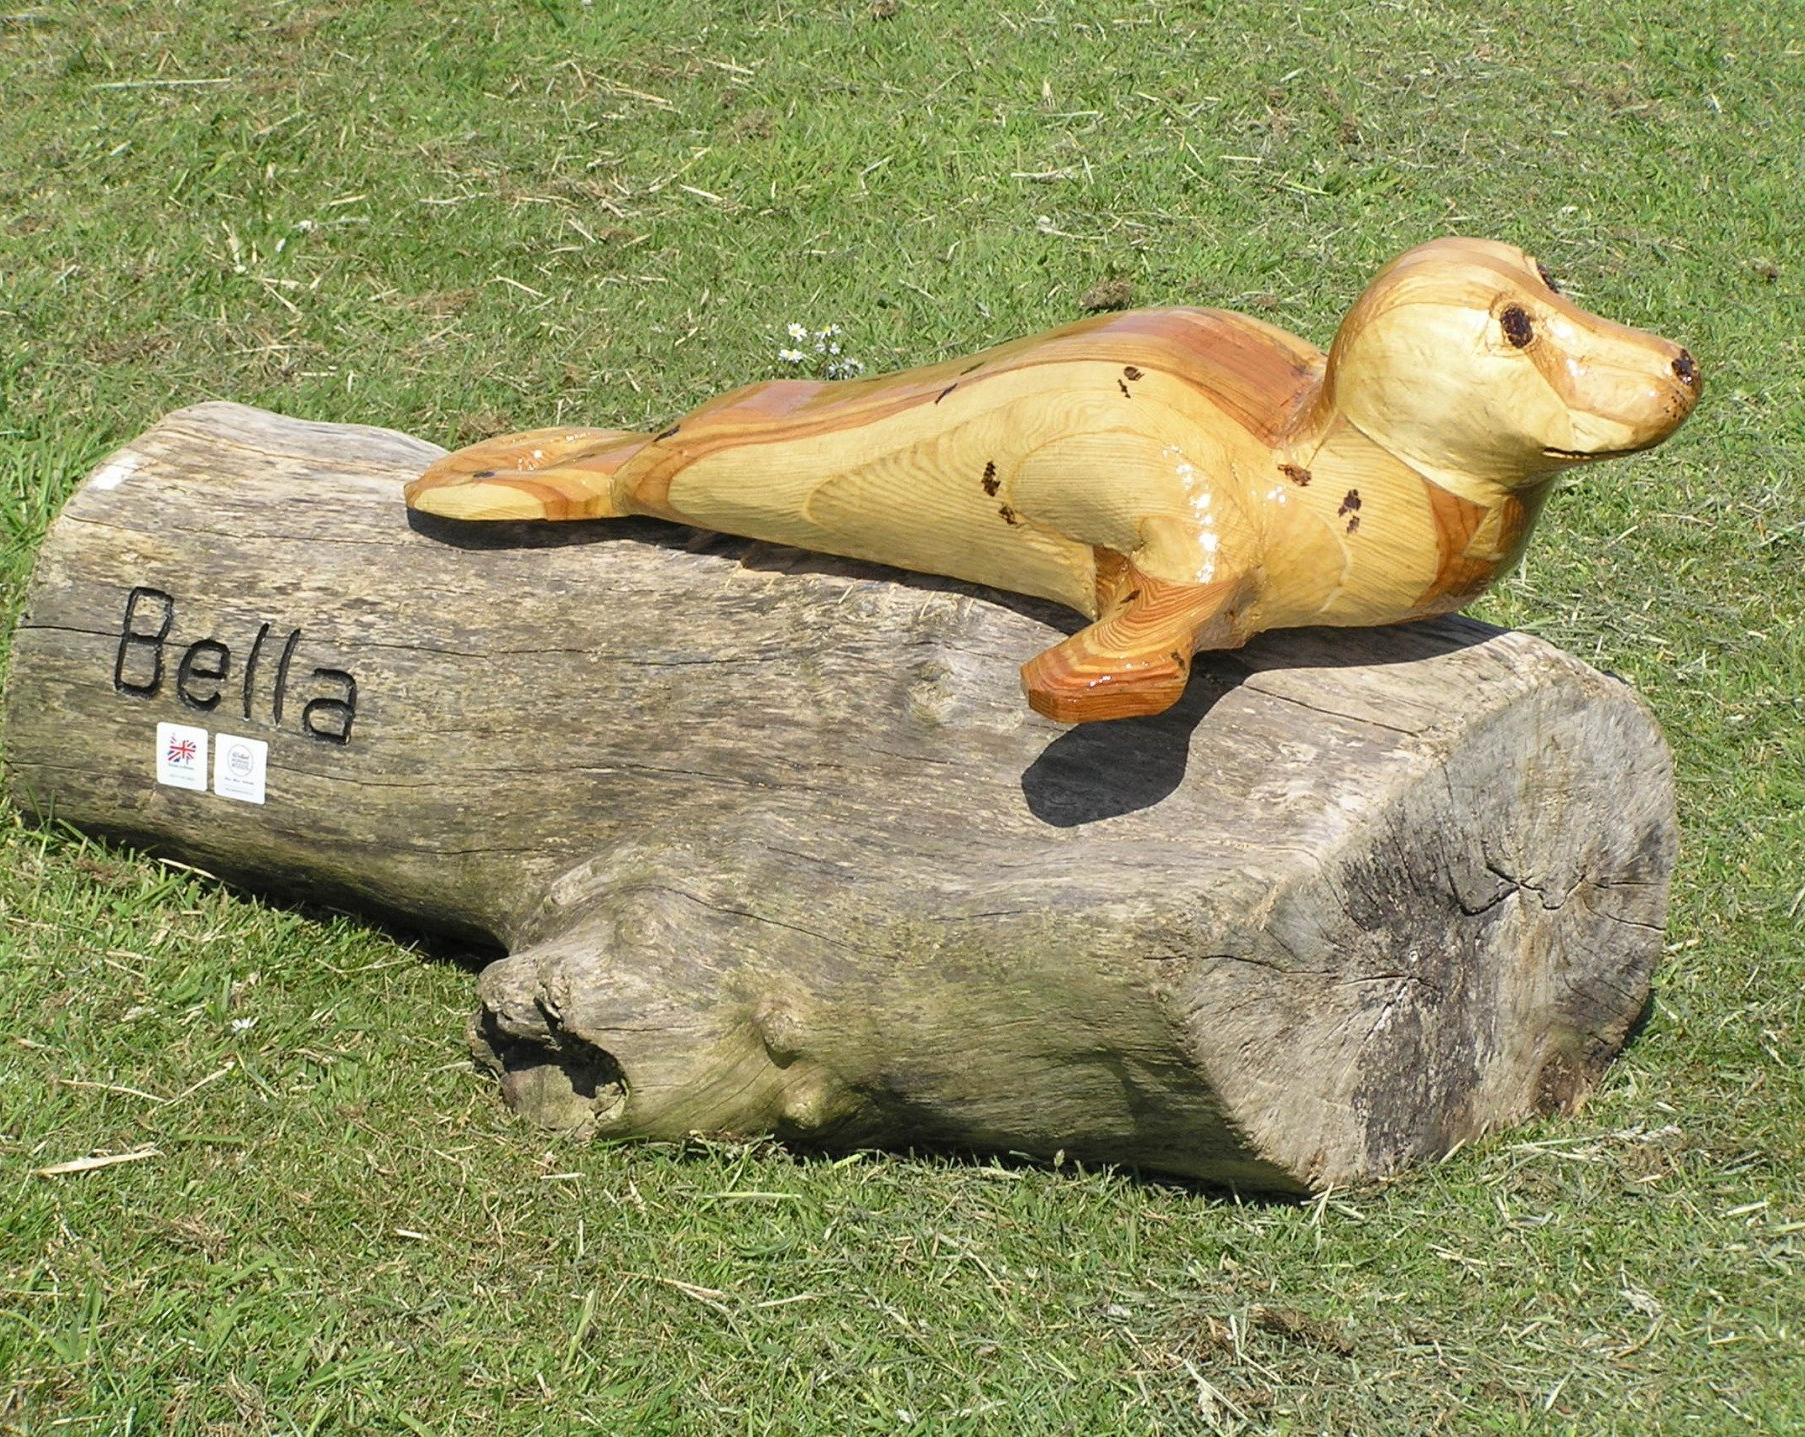 Realistic nature sculpture  made from eco-friendly sustainable wood. UK